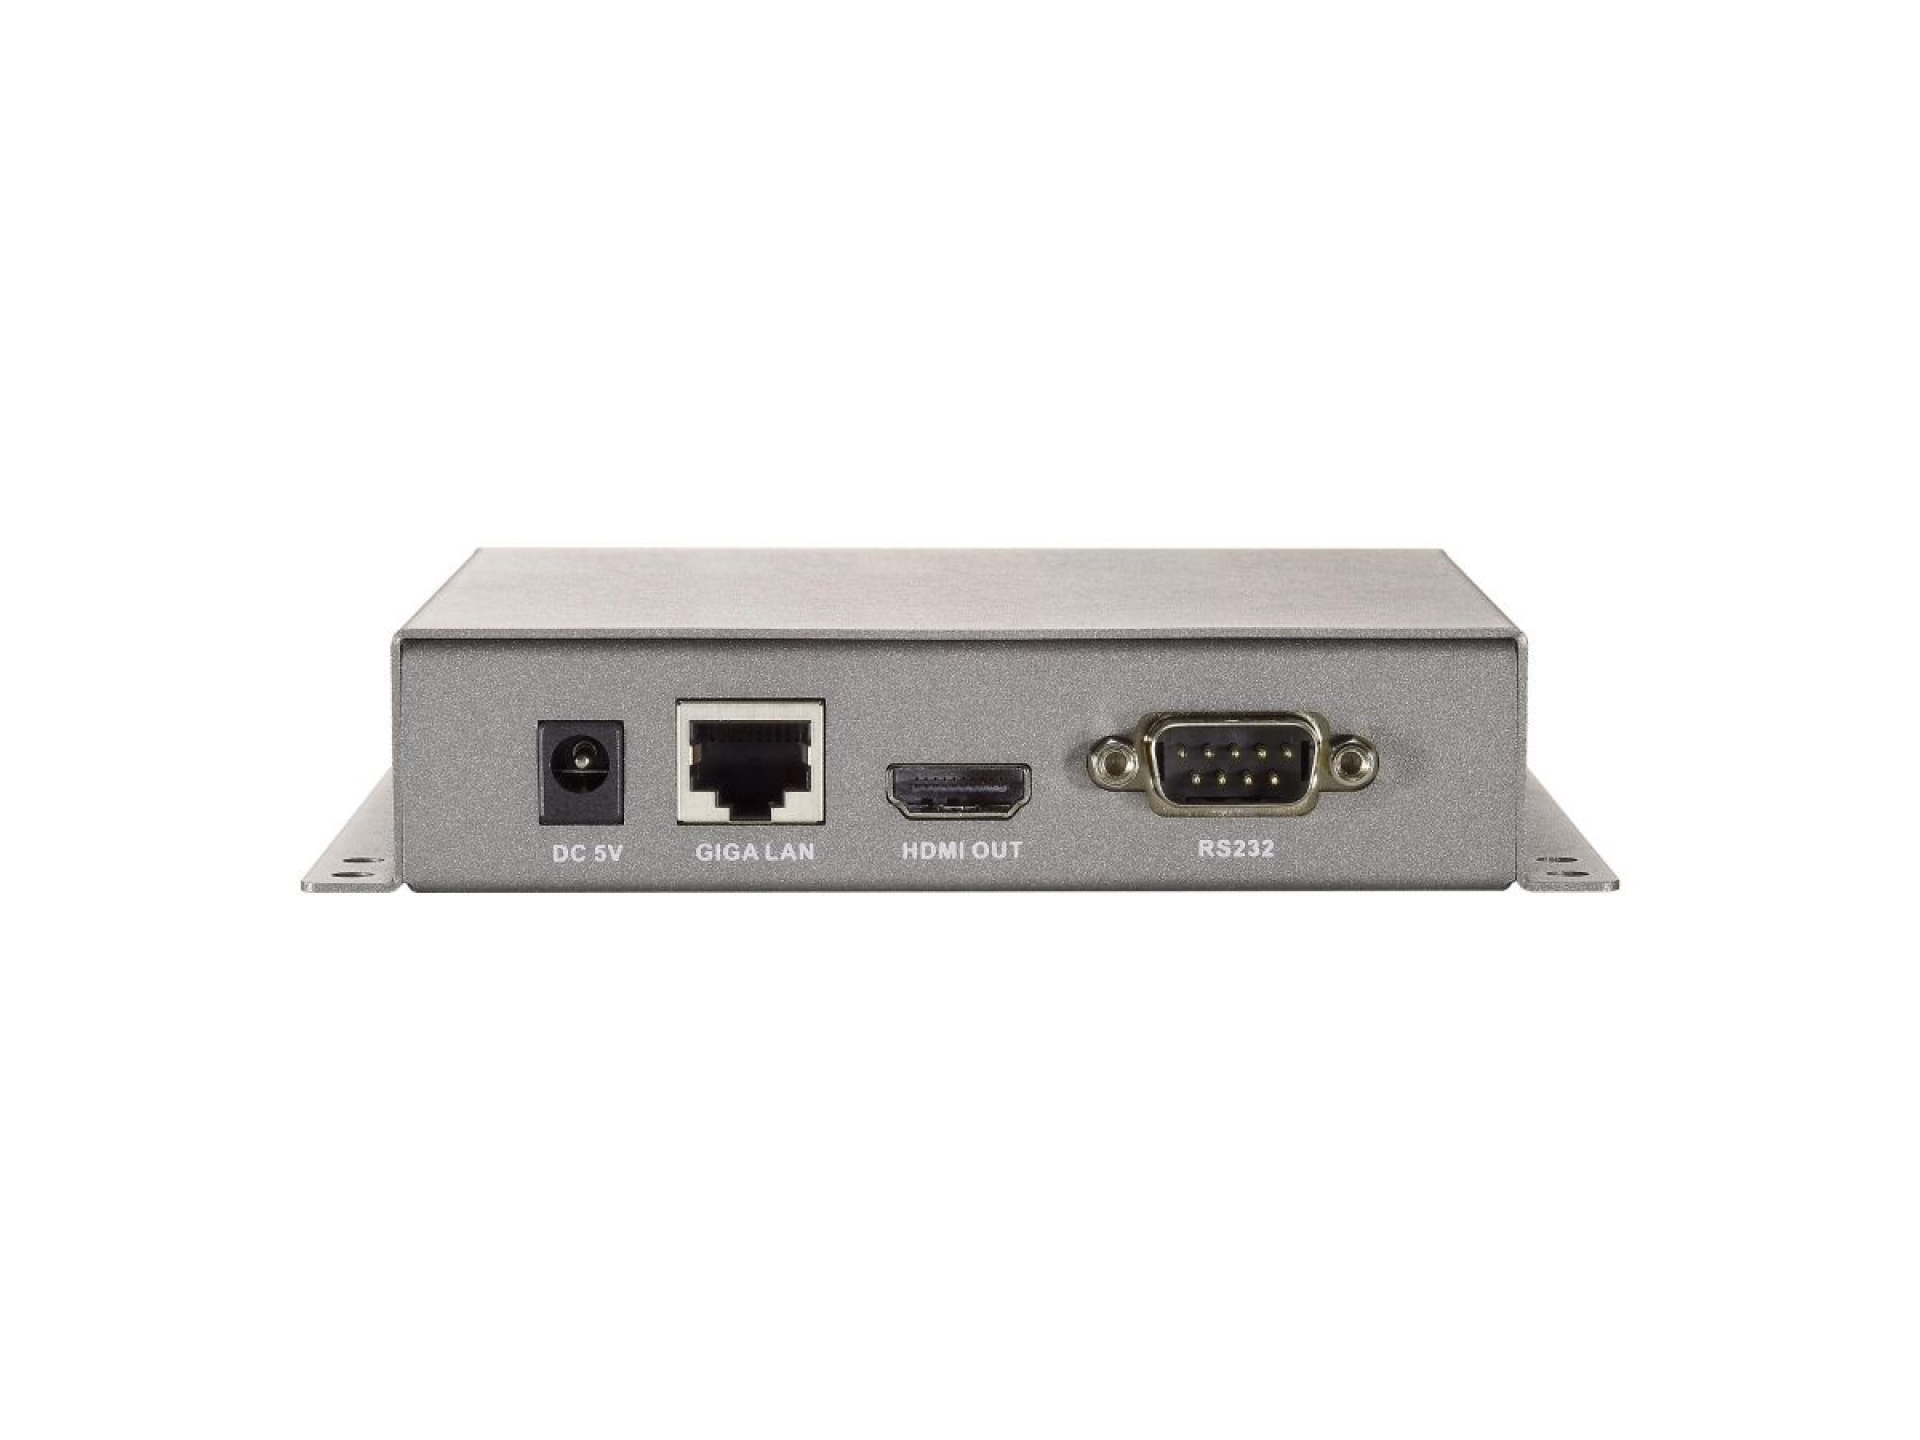 HDMI over IP PoE receiver